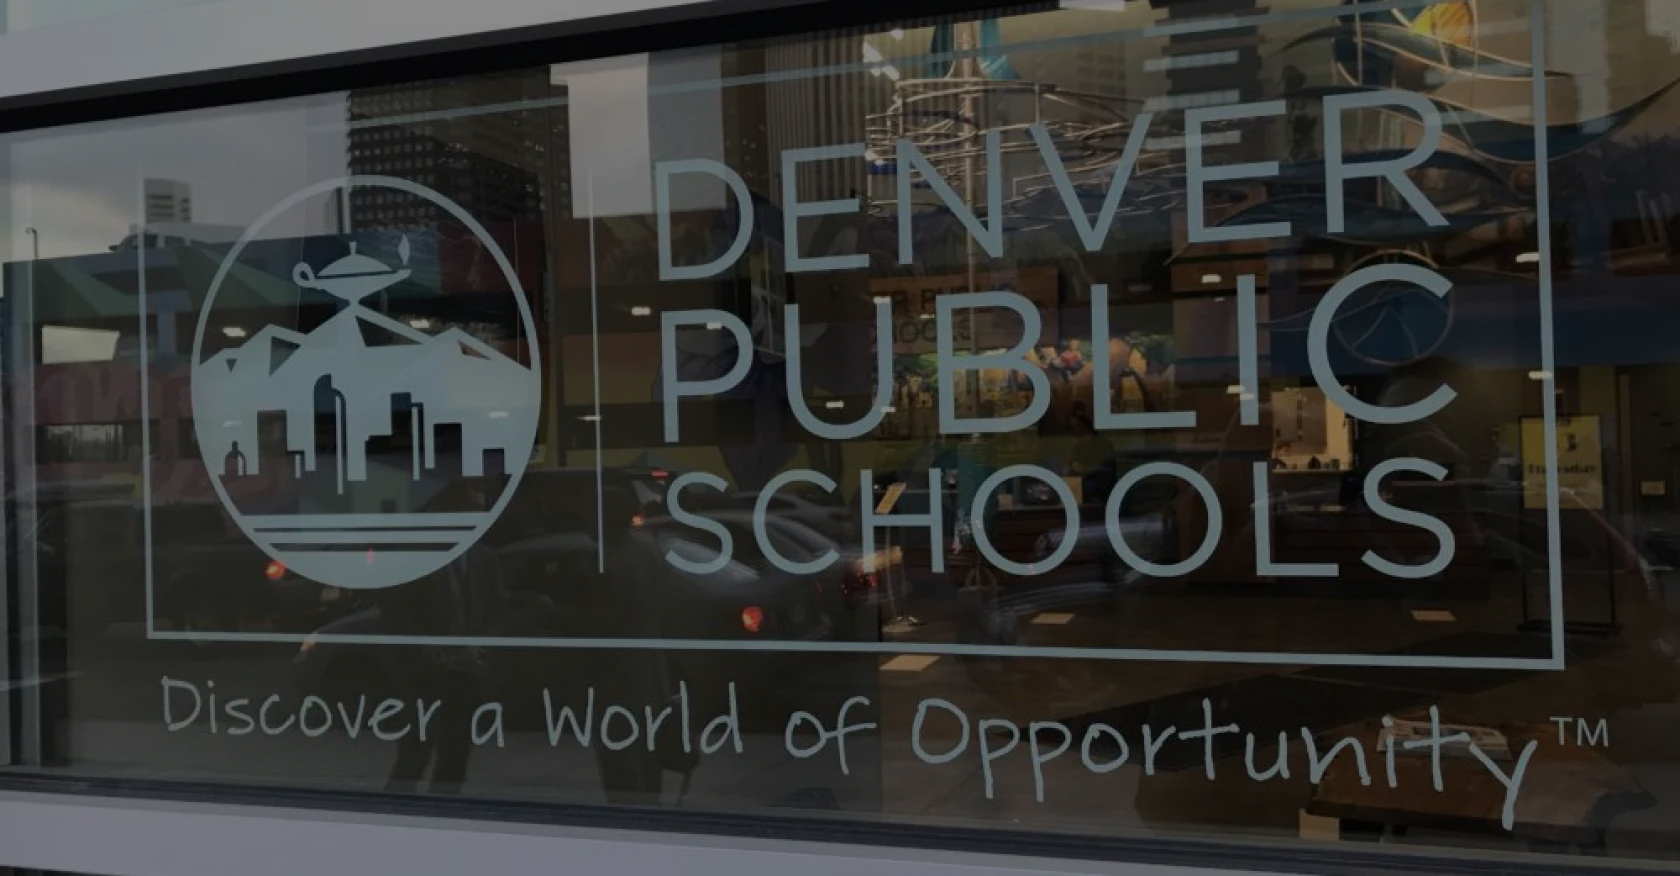 DPS has named 3 finalists in its superintendent search